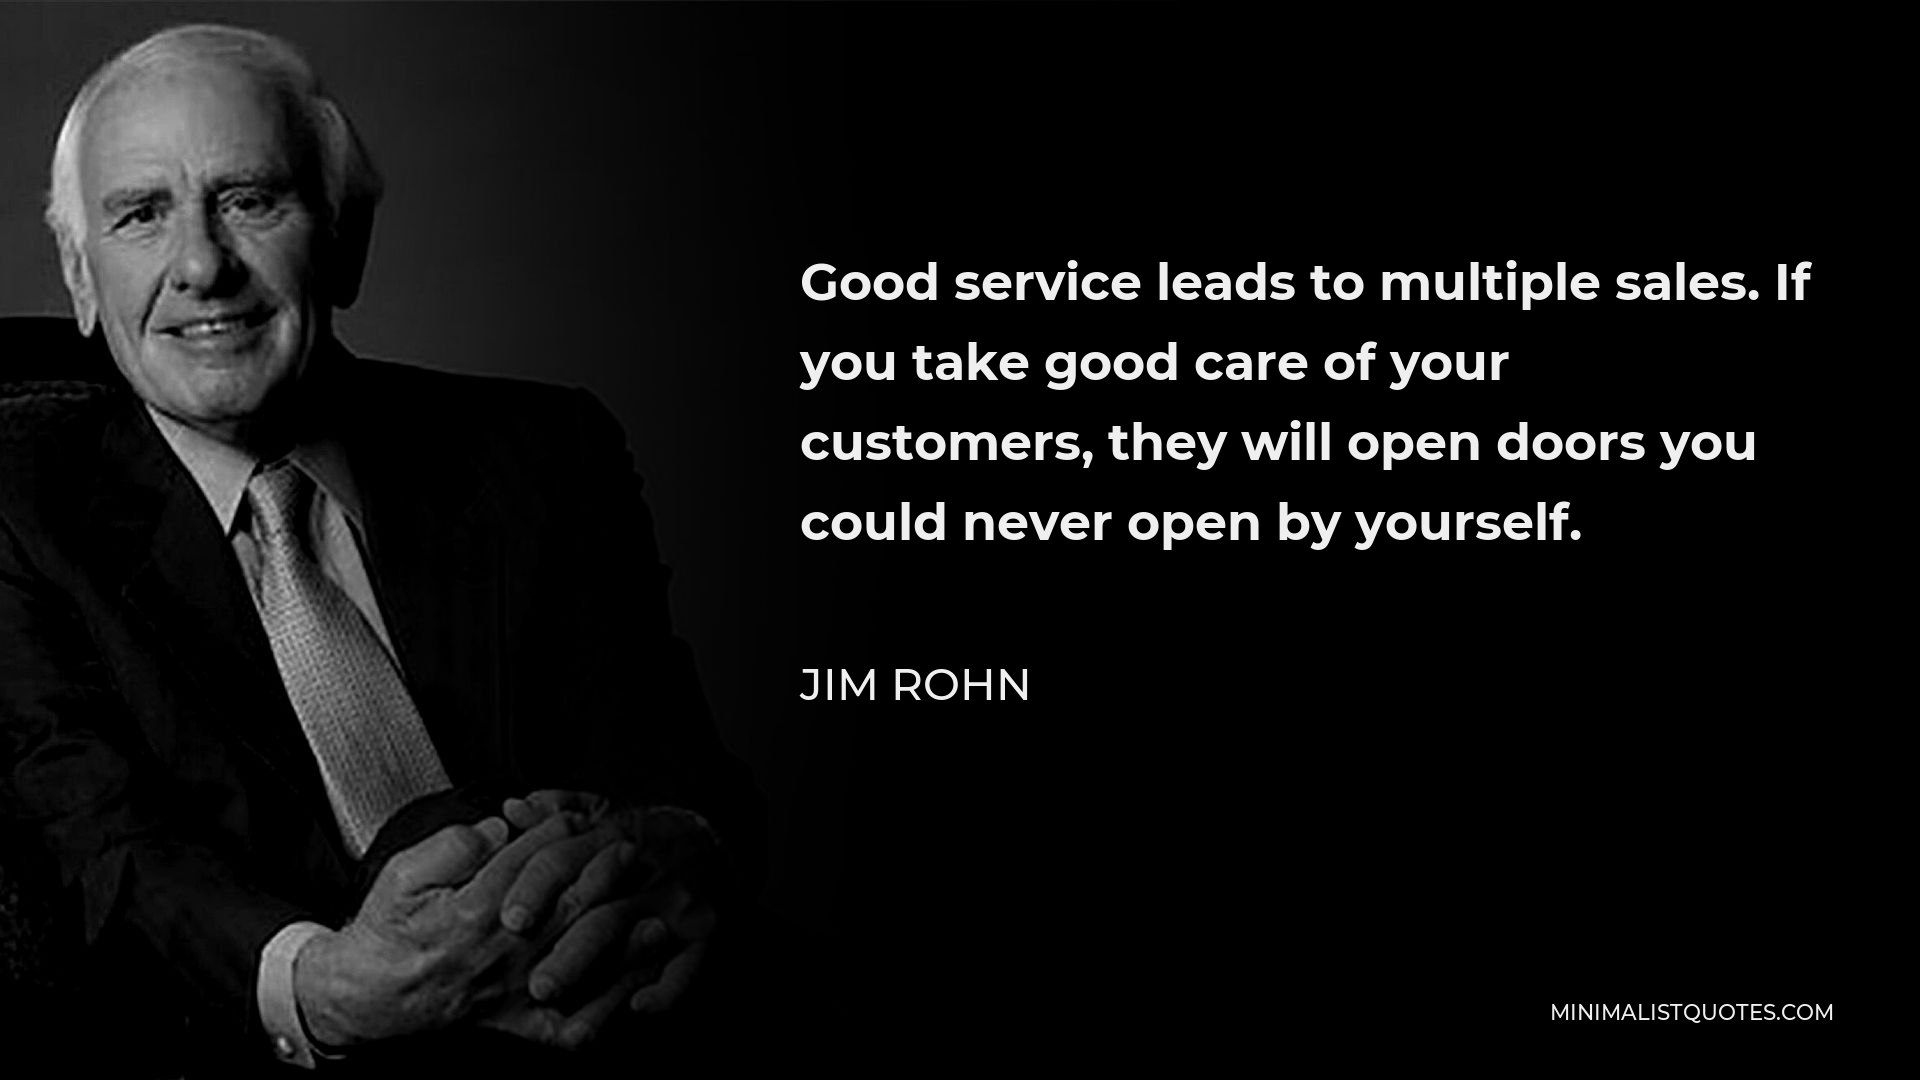 Jim Rohn Quote - Good service leads to multiple sales. If you take good care of your customers, they will open doors you could never open by yourself.